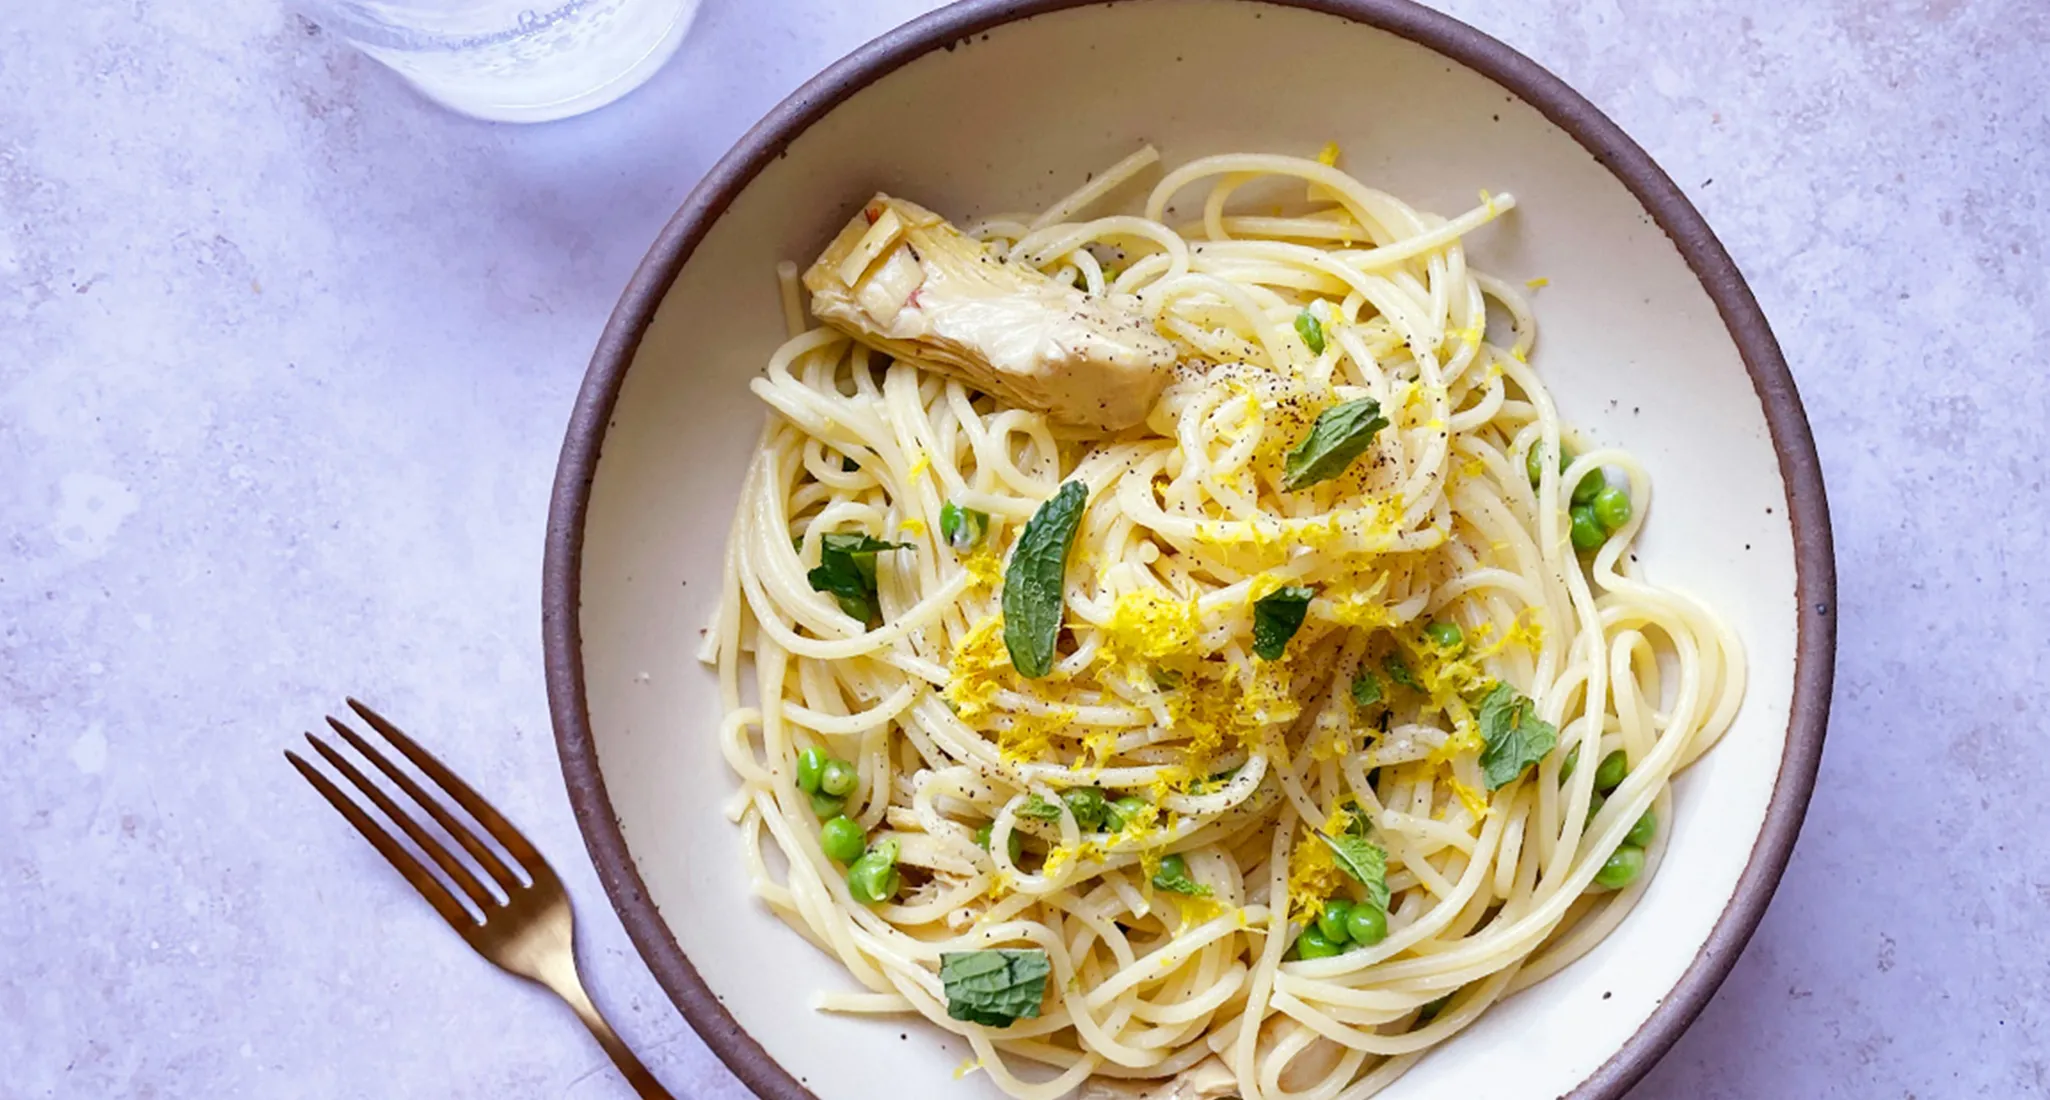 Delicious Pasta With Artichokes, Peas, And Fresh Mint